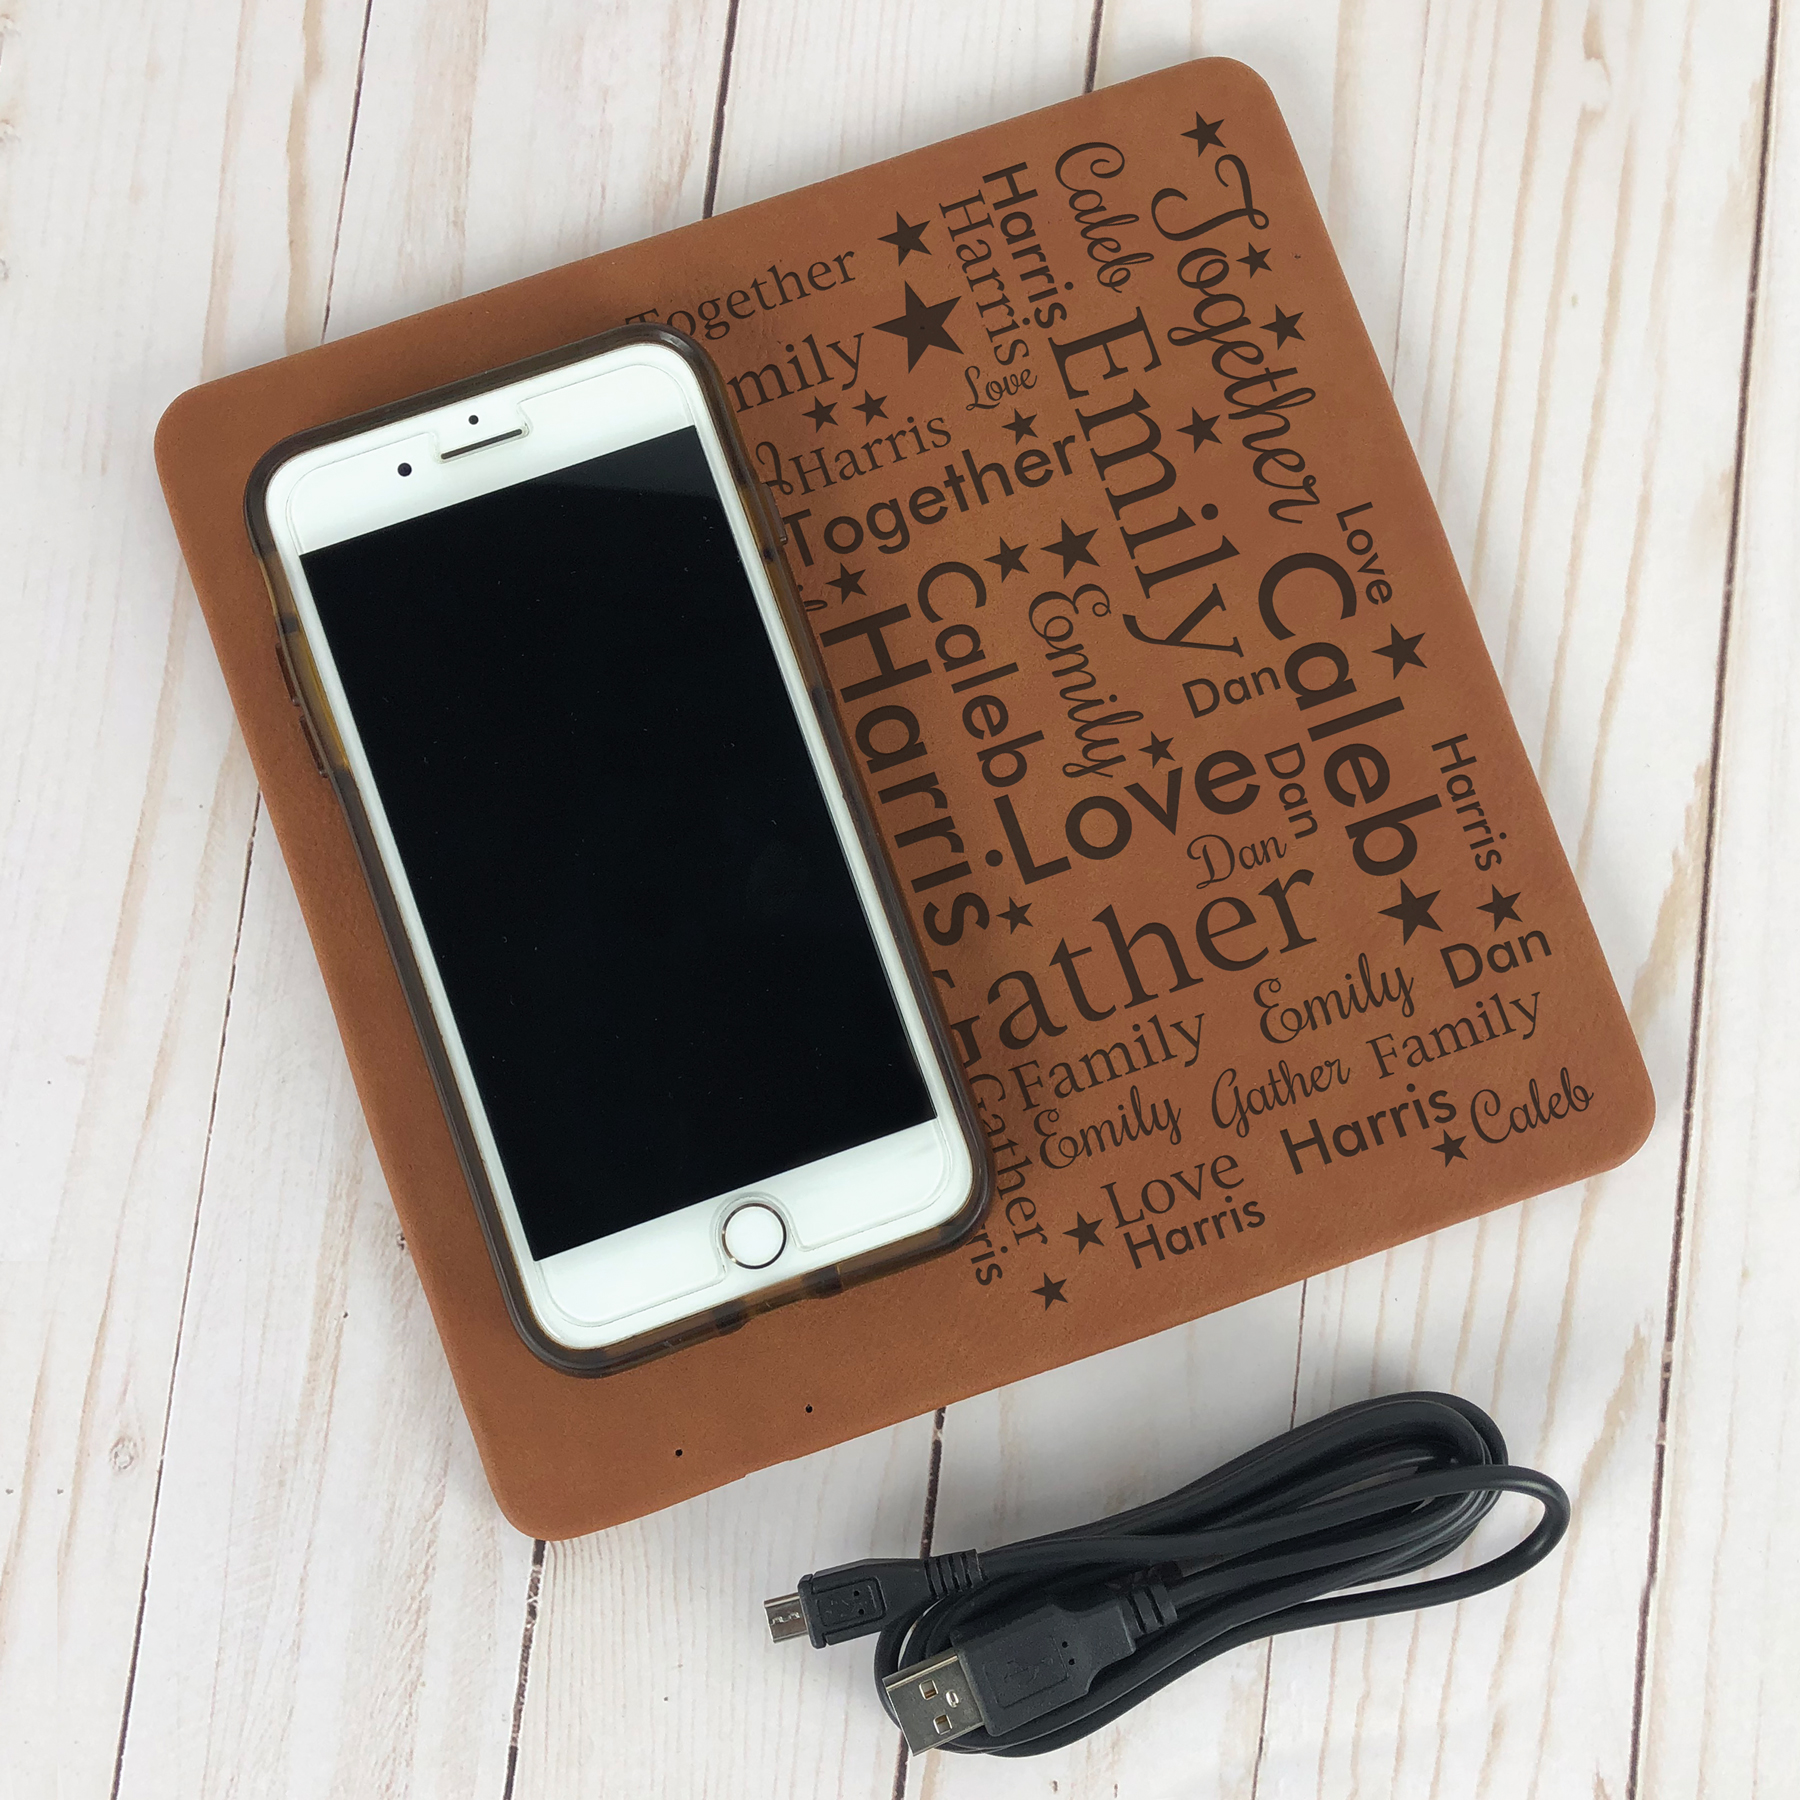 Phone Charging Mat | Personalized Phone Charger